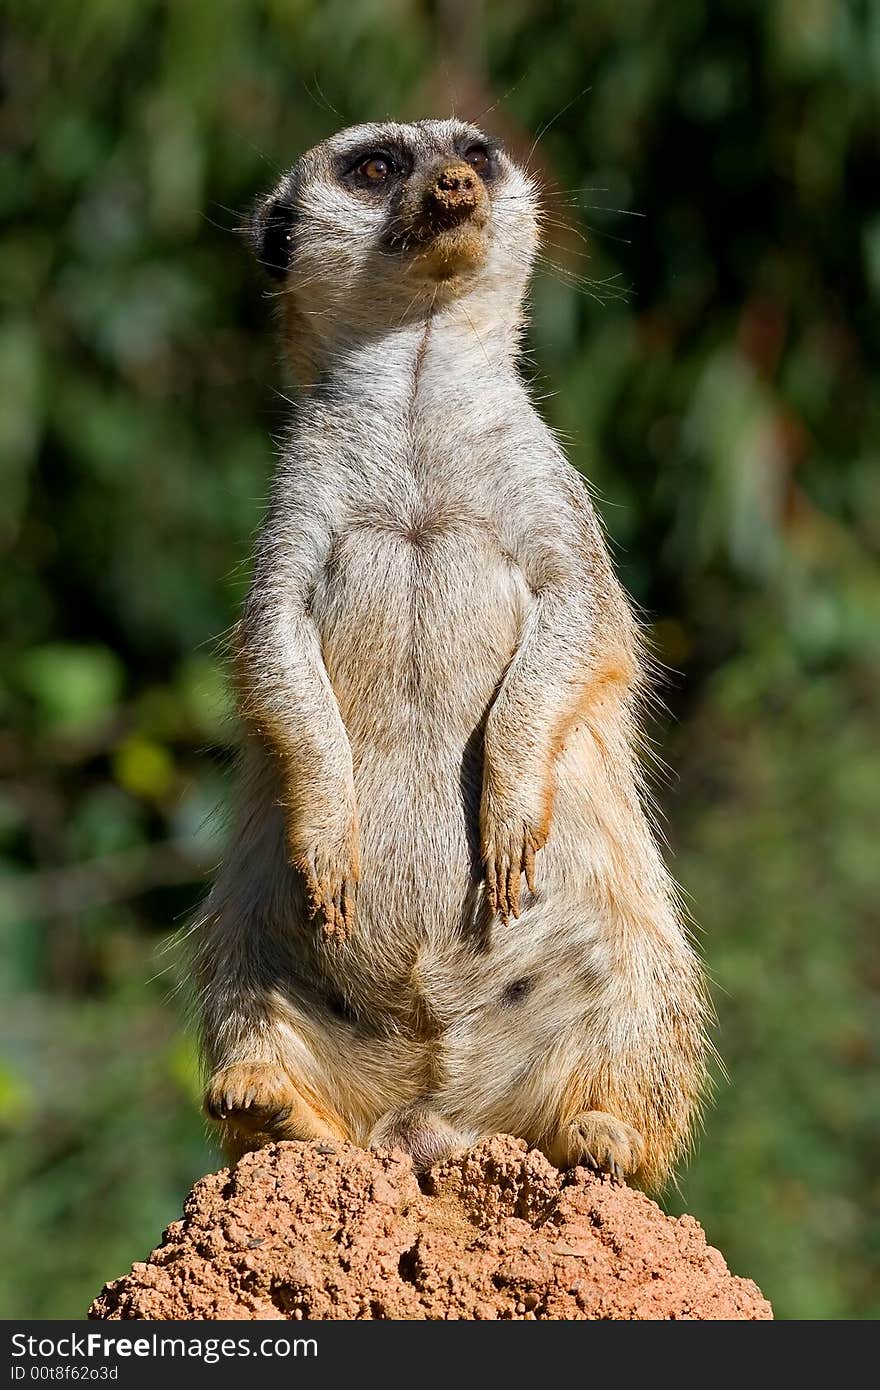 Slender-tailed meerkat on the look out